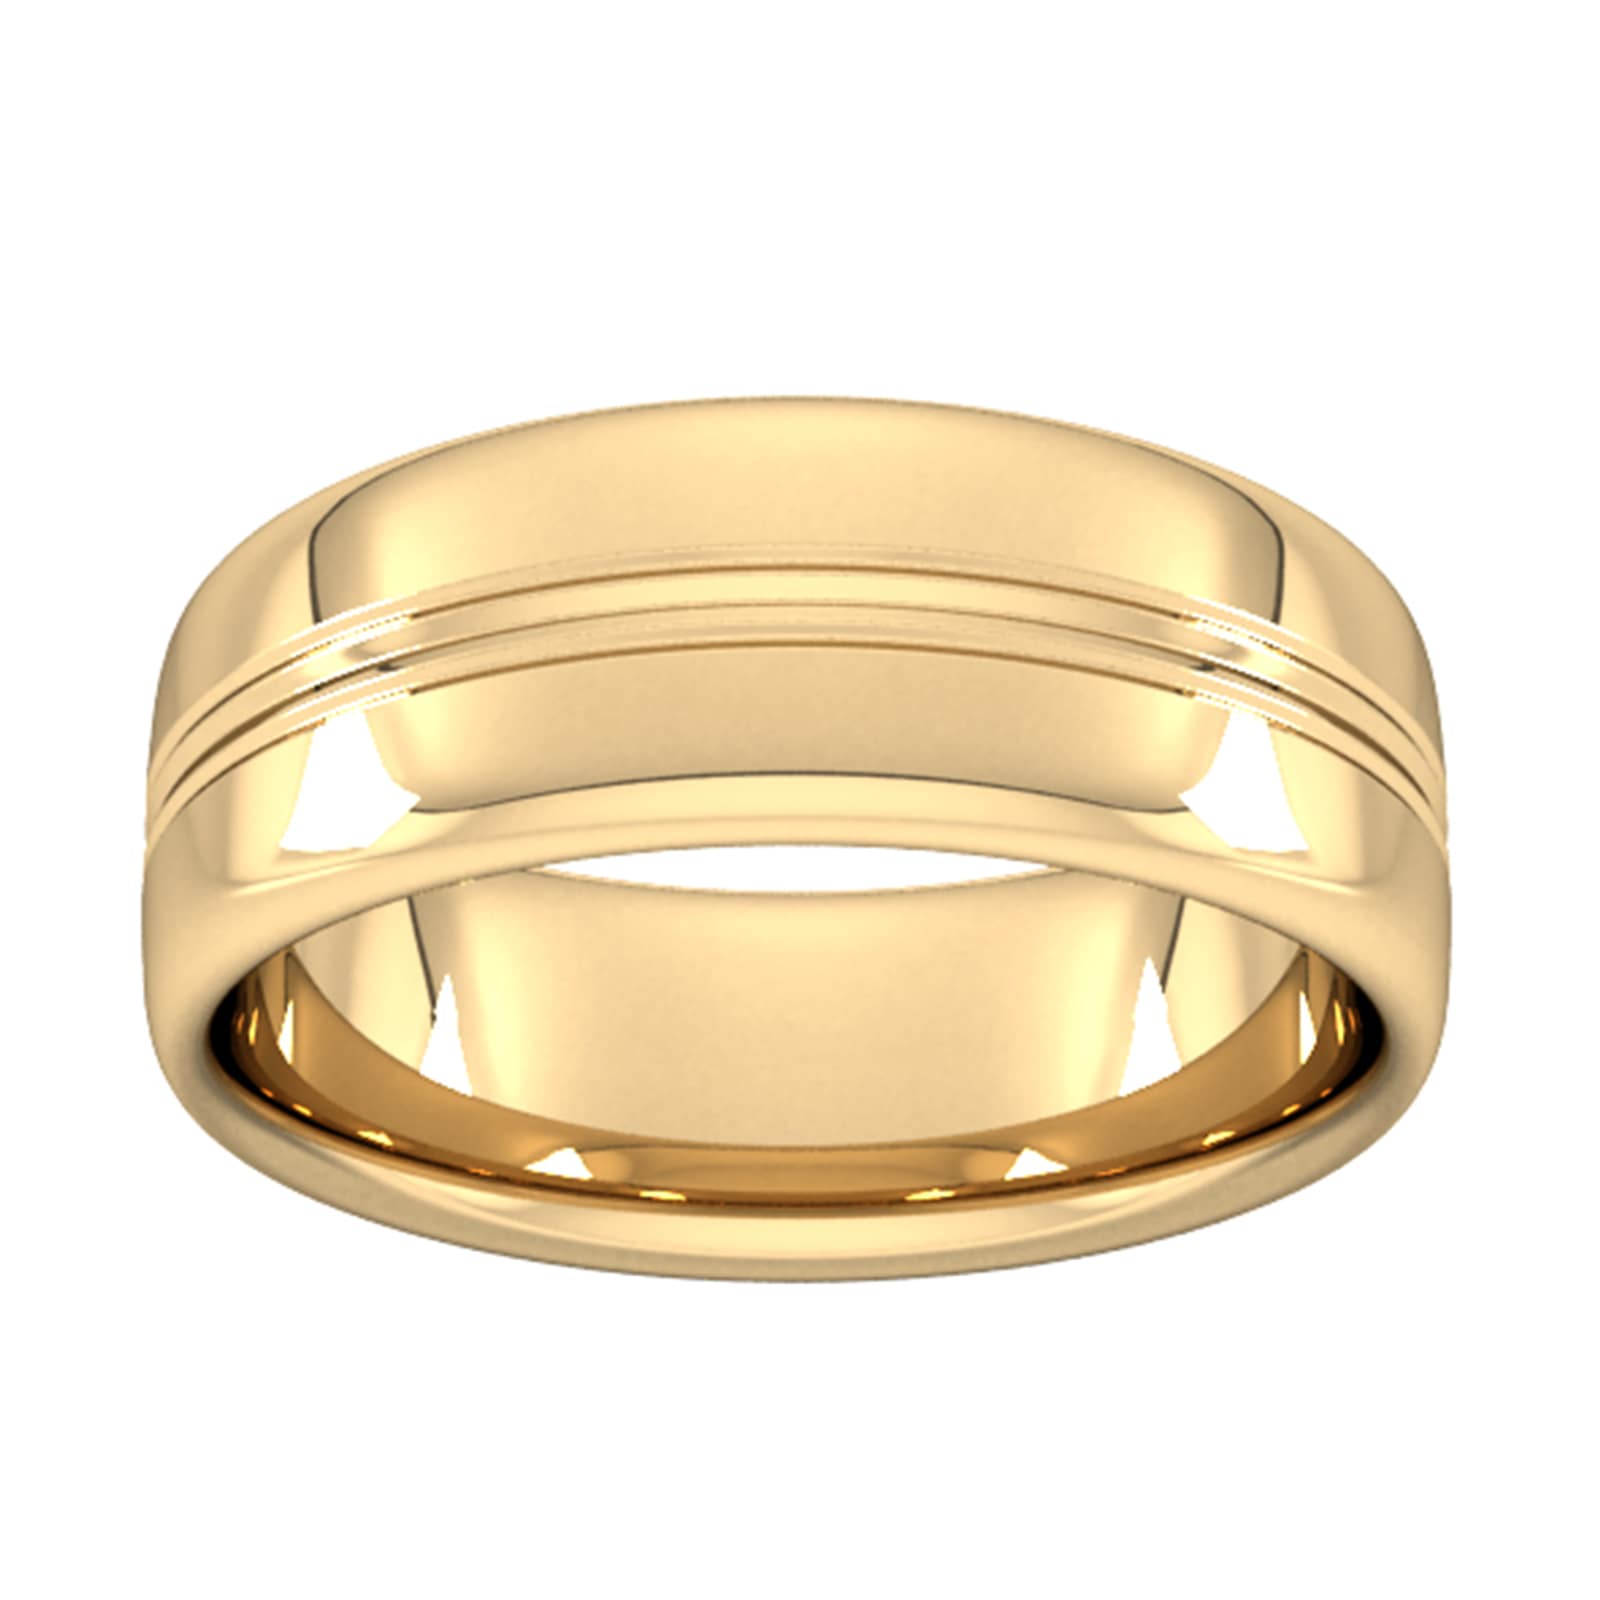 8mm Slight Court Standard Grooved Polished Finish Wedding Ring In 18 Carat Yellow Gold - Ring Size M